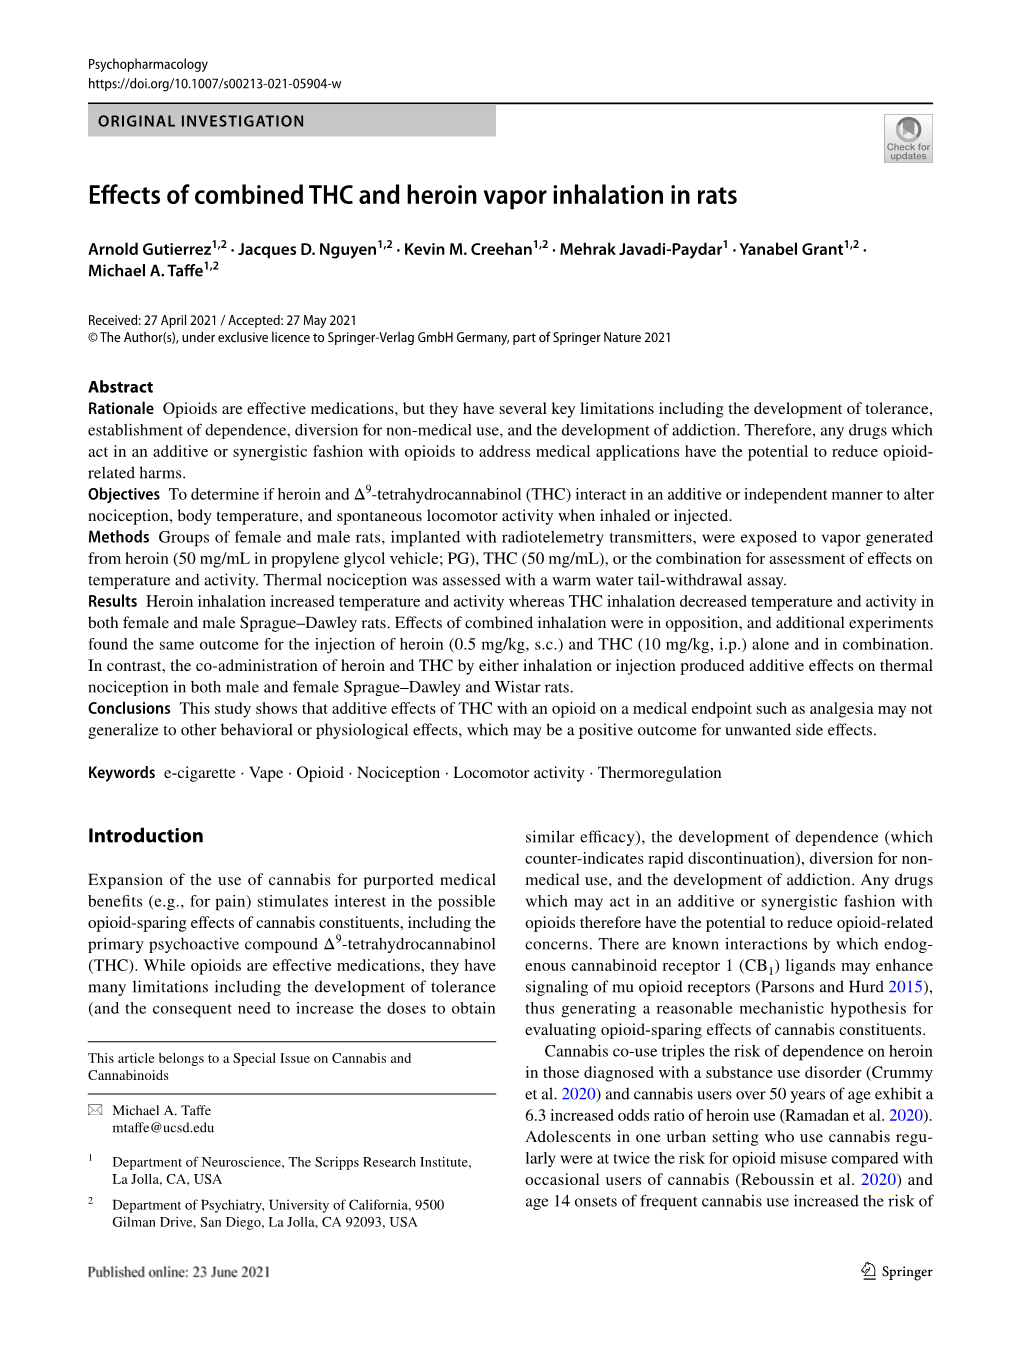 Effects of Combined THC and Heroin Vapor Inhalation